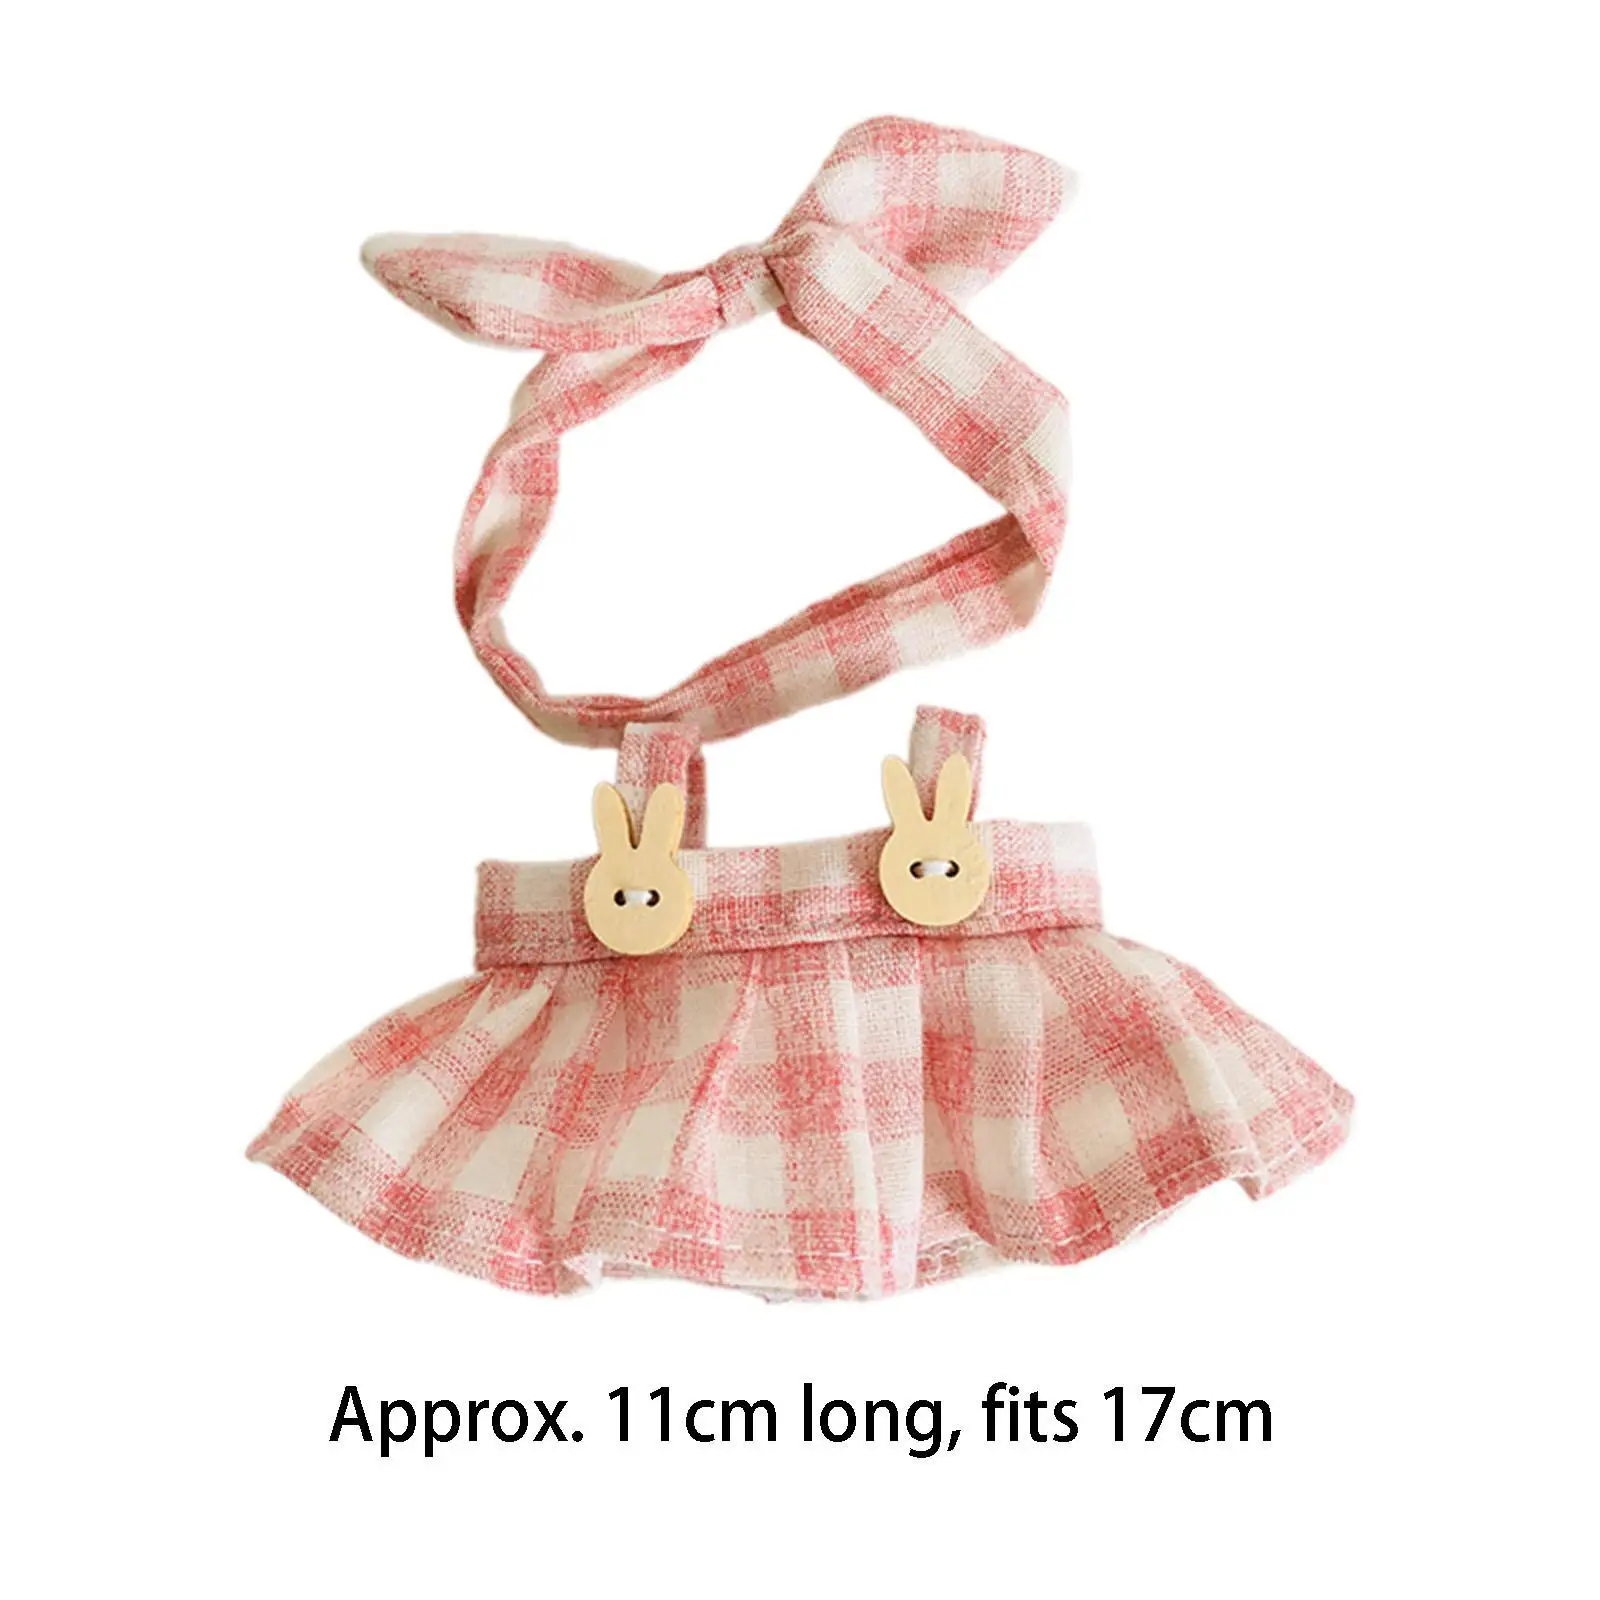 Cute Doll Clothes Suit Fashion Handmade Costumes Dresses Outfit Dress up